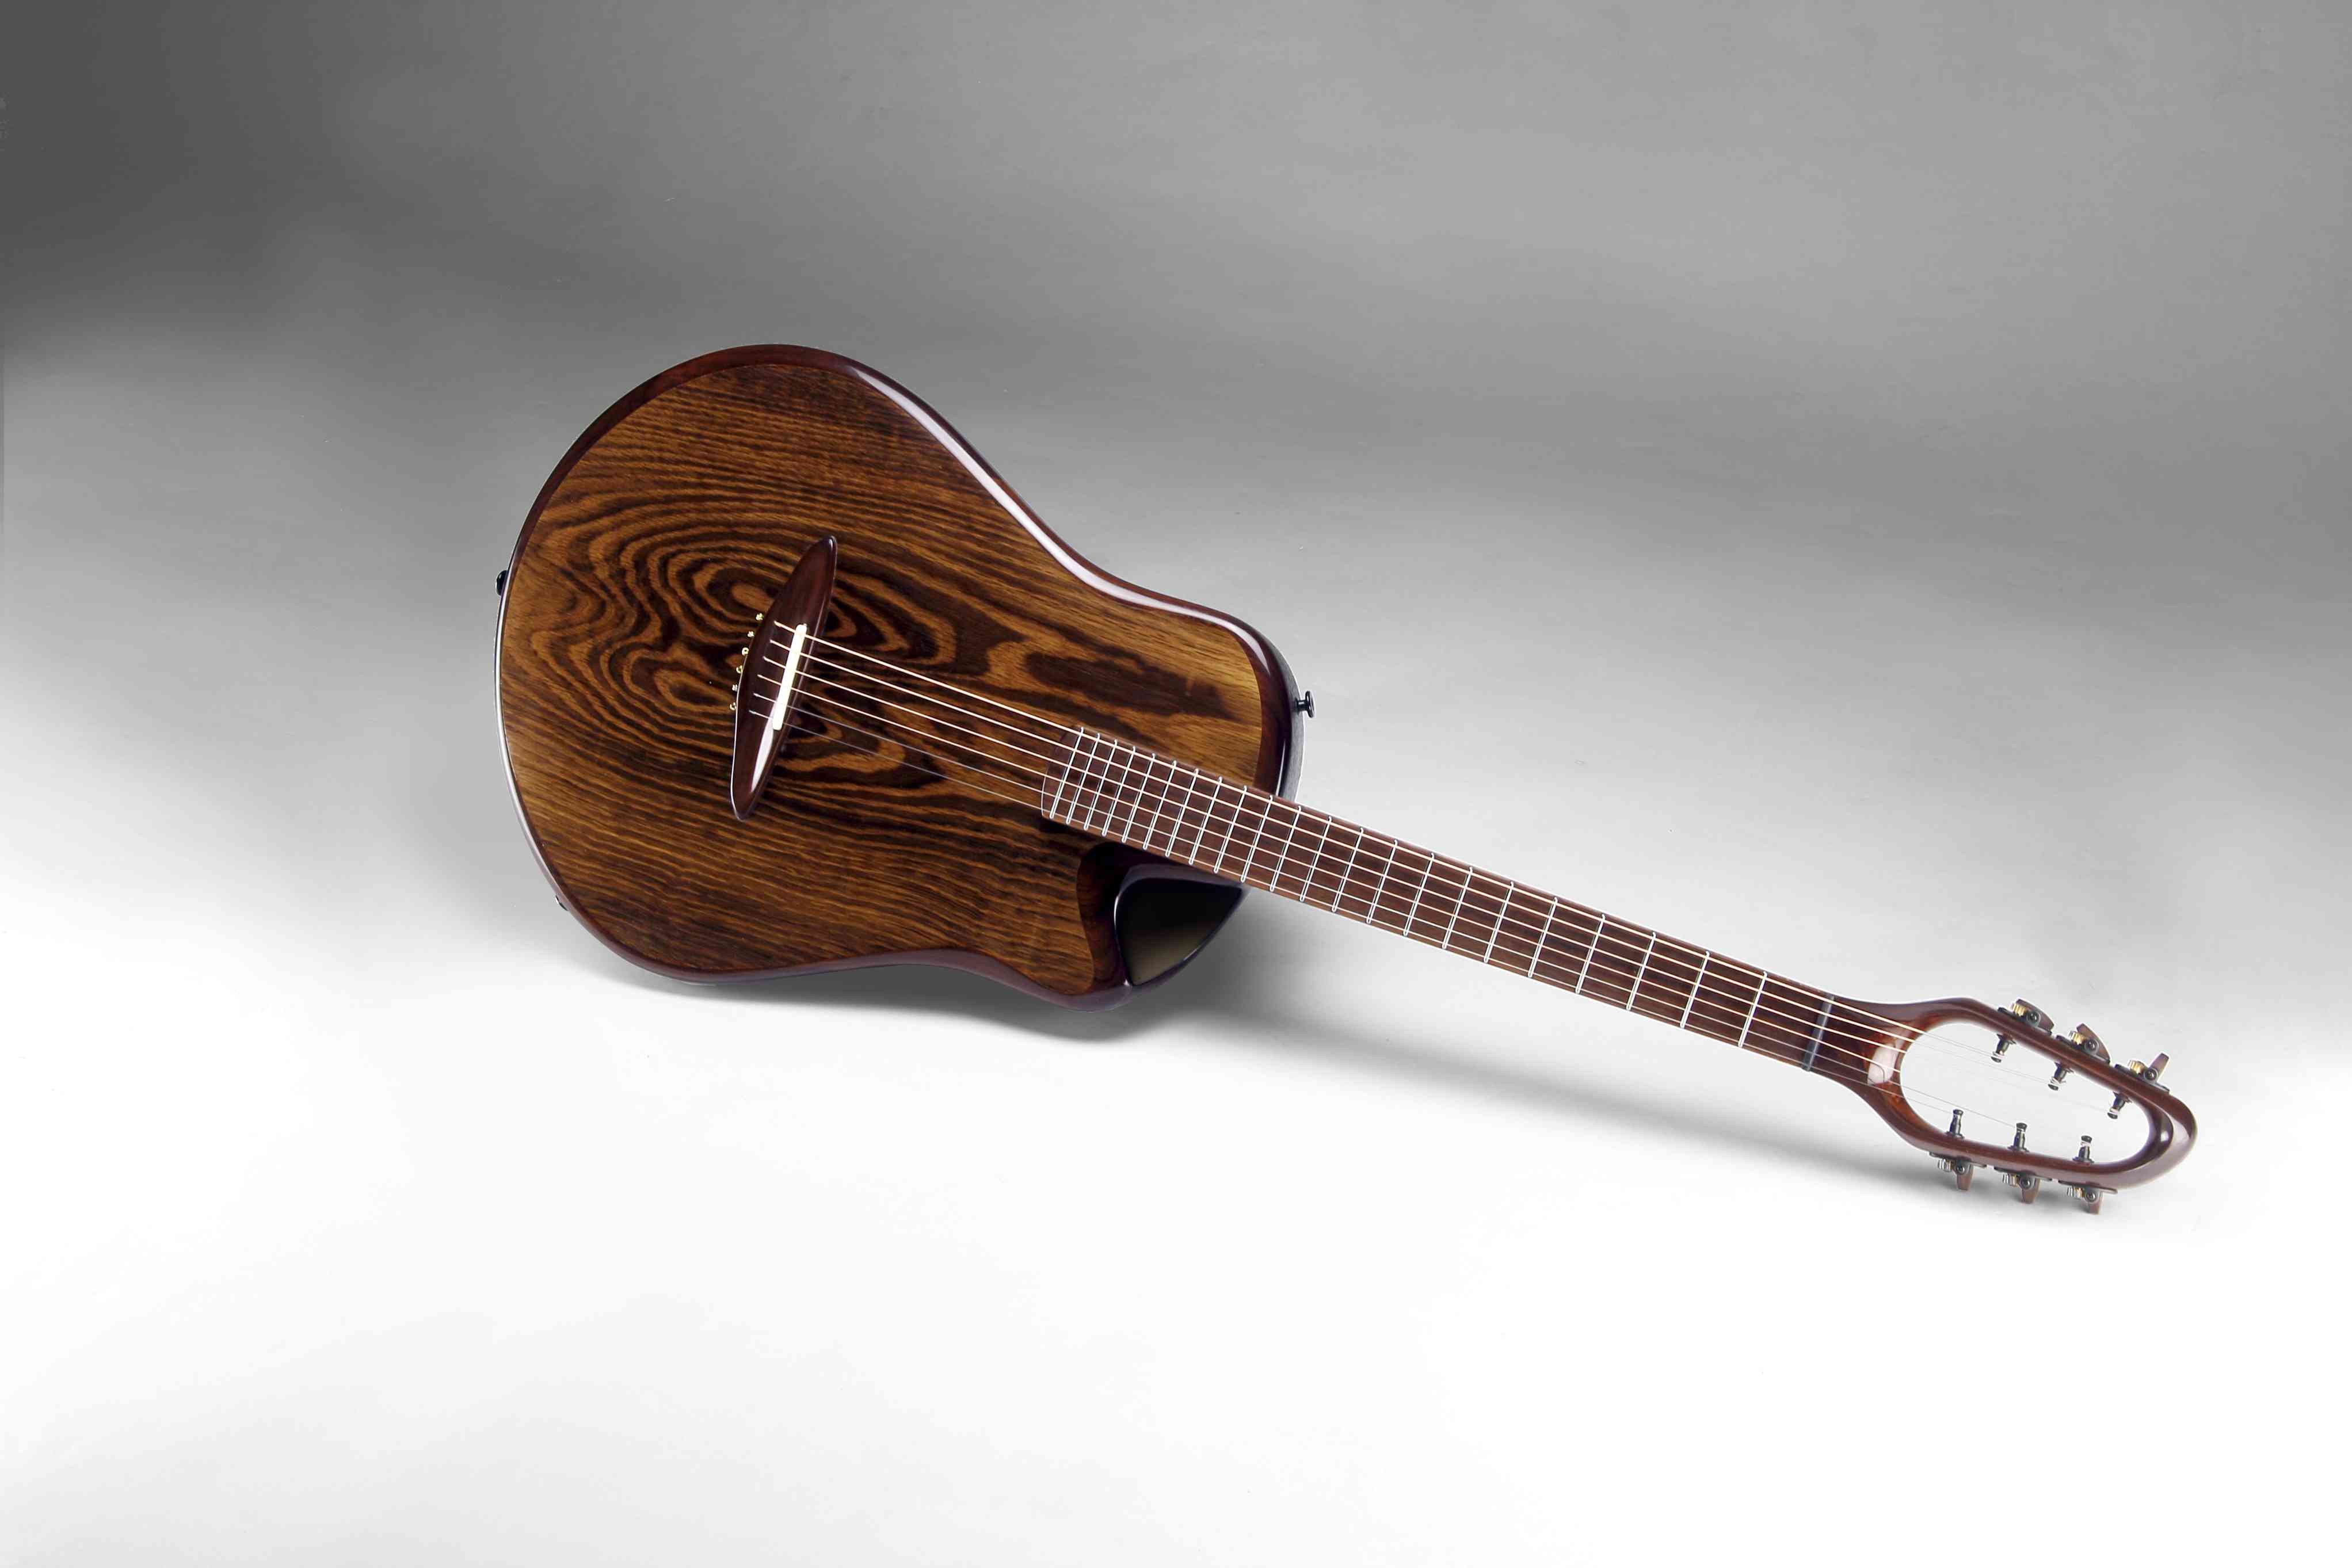 CannaGuitar with top from Sonoveneer oak, fretboard and bridge from Sonowood walnut